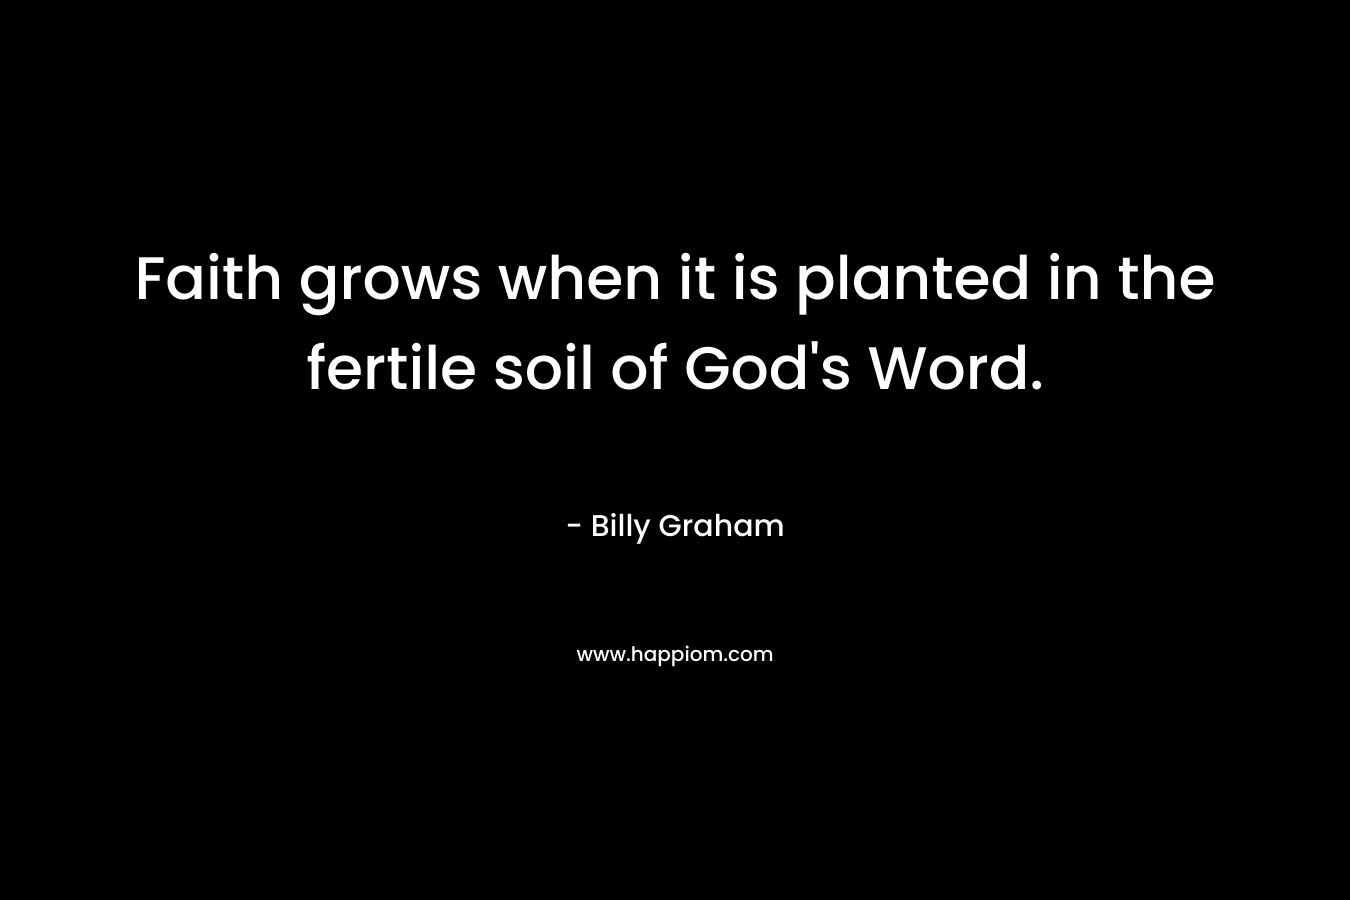 Faith grows when it is planted in the fertile soil of God's Word.